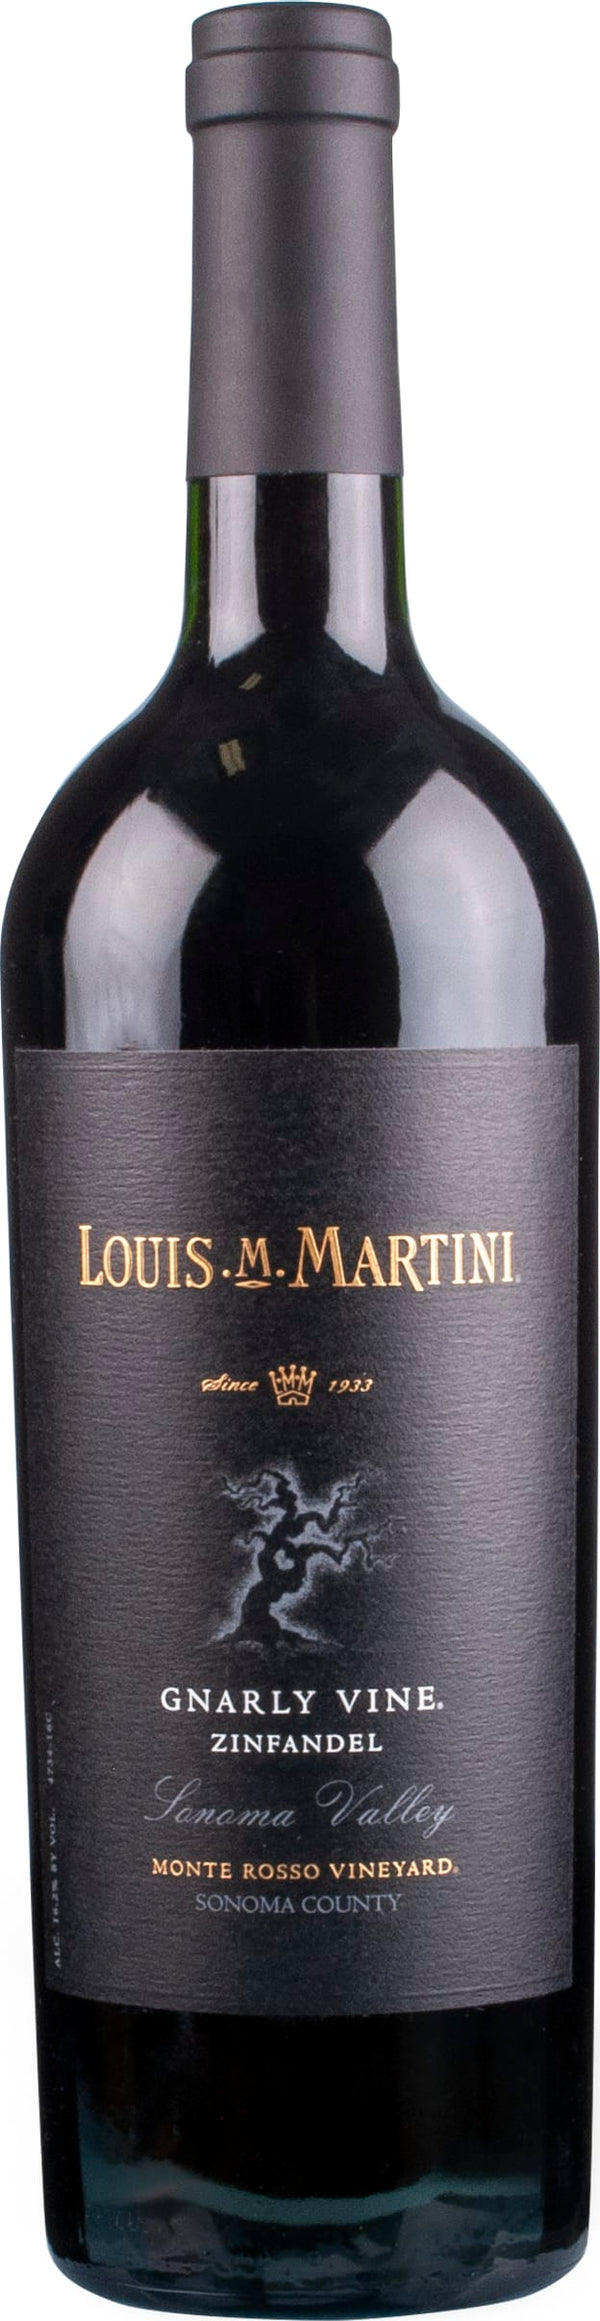 Louis M Martini Monte Rosso Gnarly Vine Zinfandel 2018 6x75cl - Just Wines 